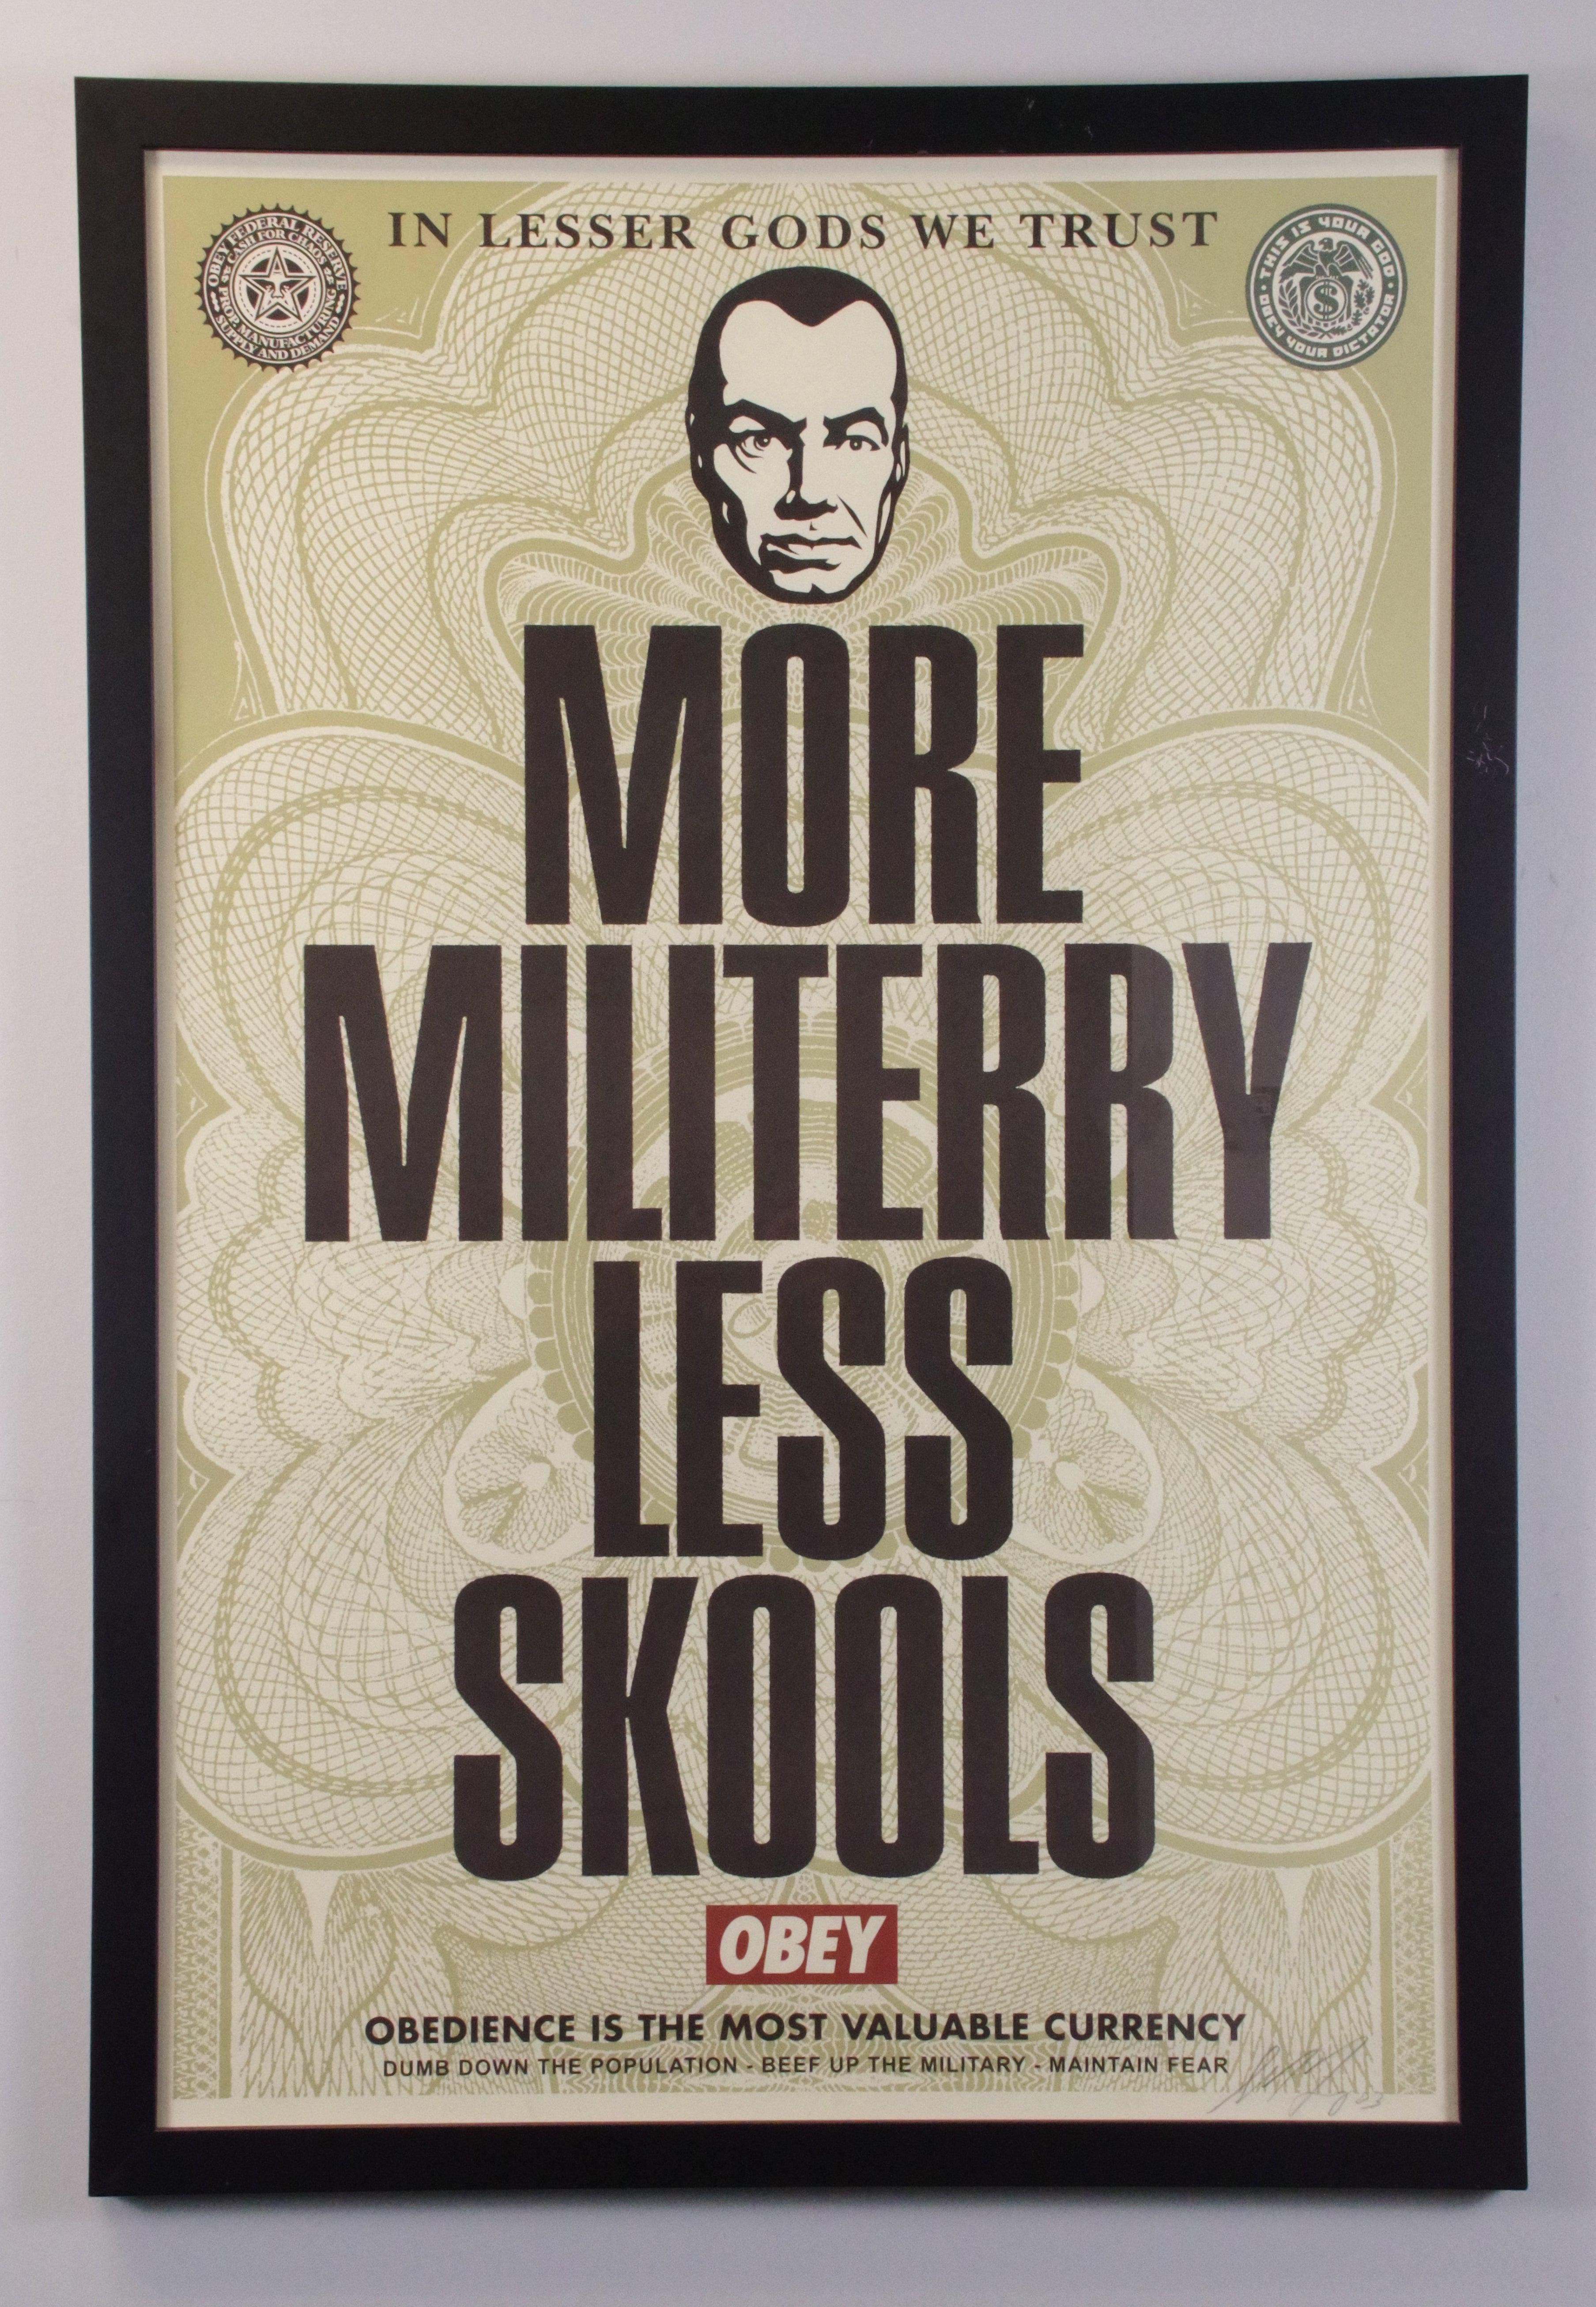 SHEPARD FAIREY More Militerry Less Skools, 2003 - Signed - Print by Shepard Fairey